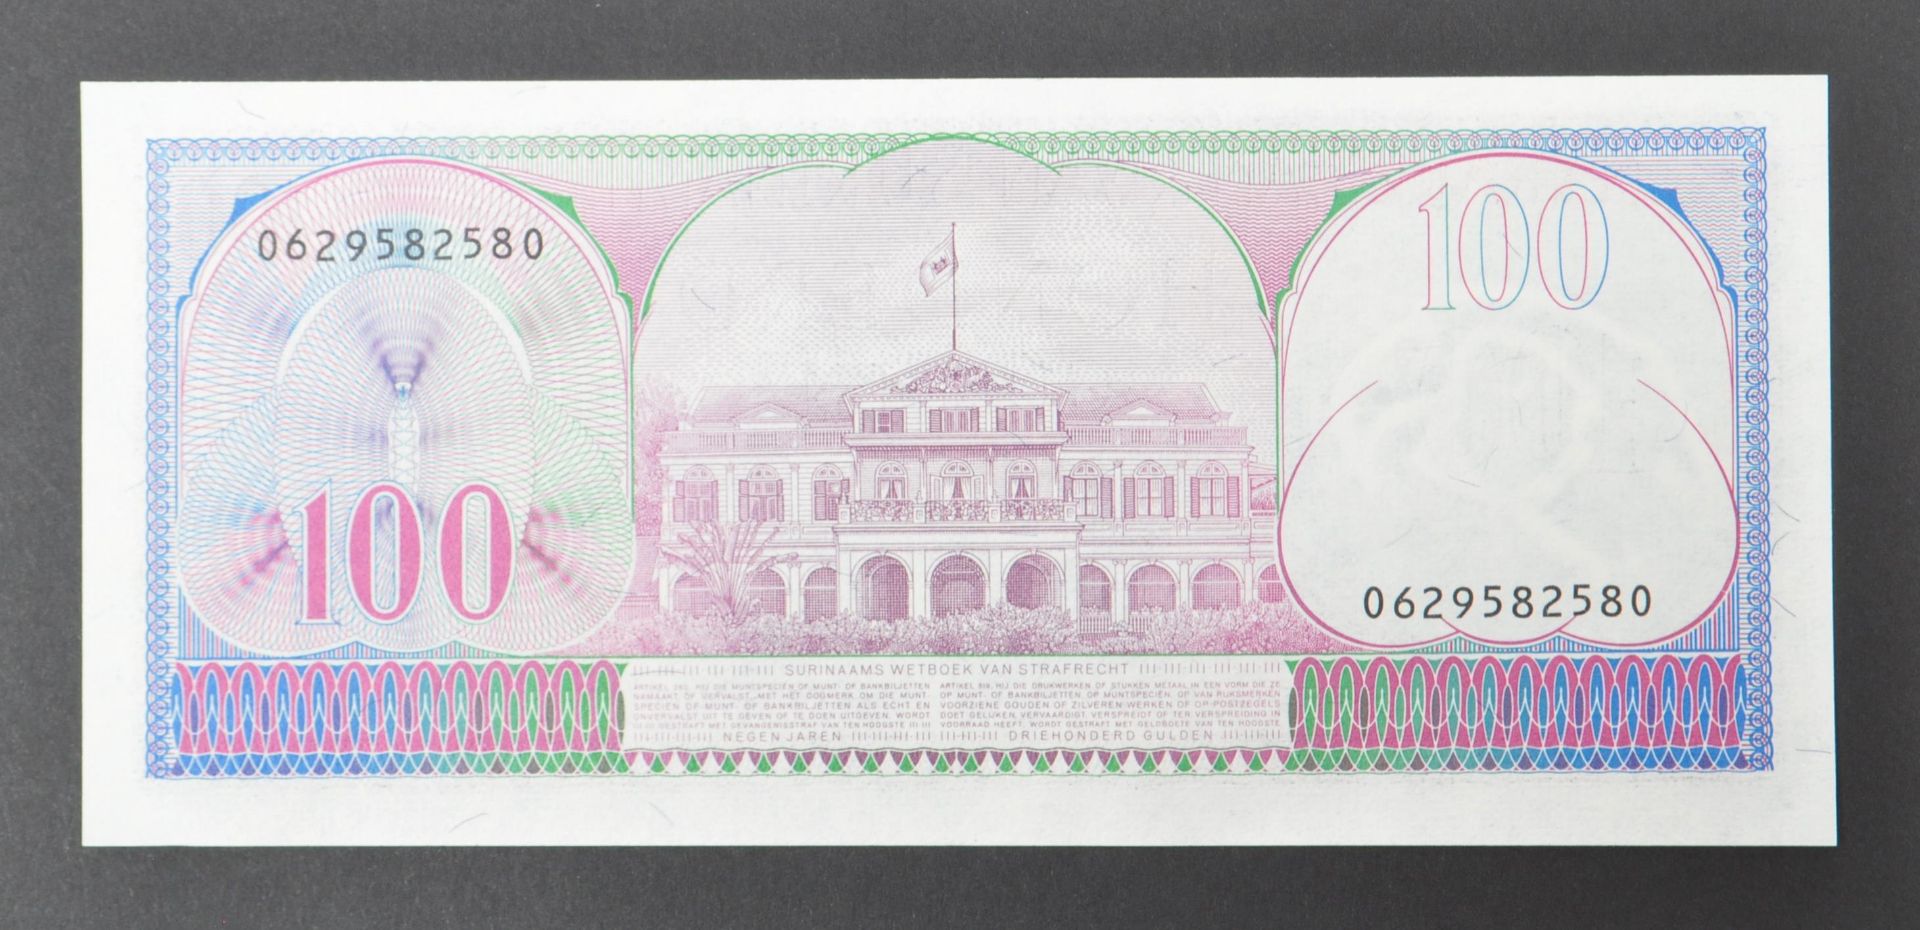 COLLECTION INTERNATIONAL UNCIRCULATED BANK NOTES - Image 8 of 14